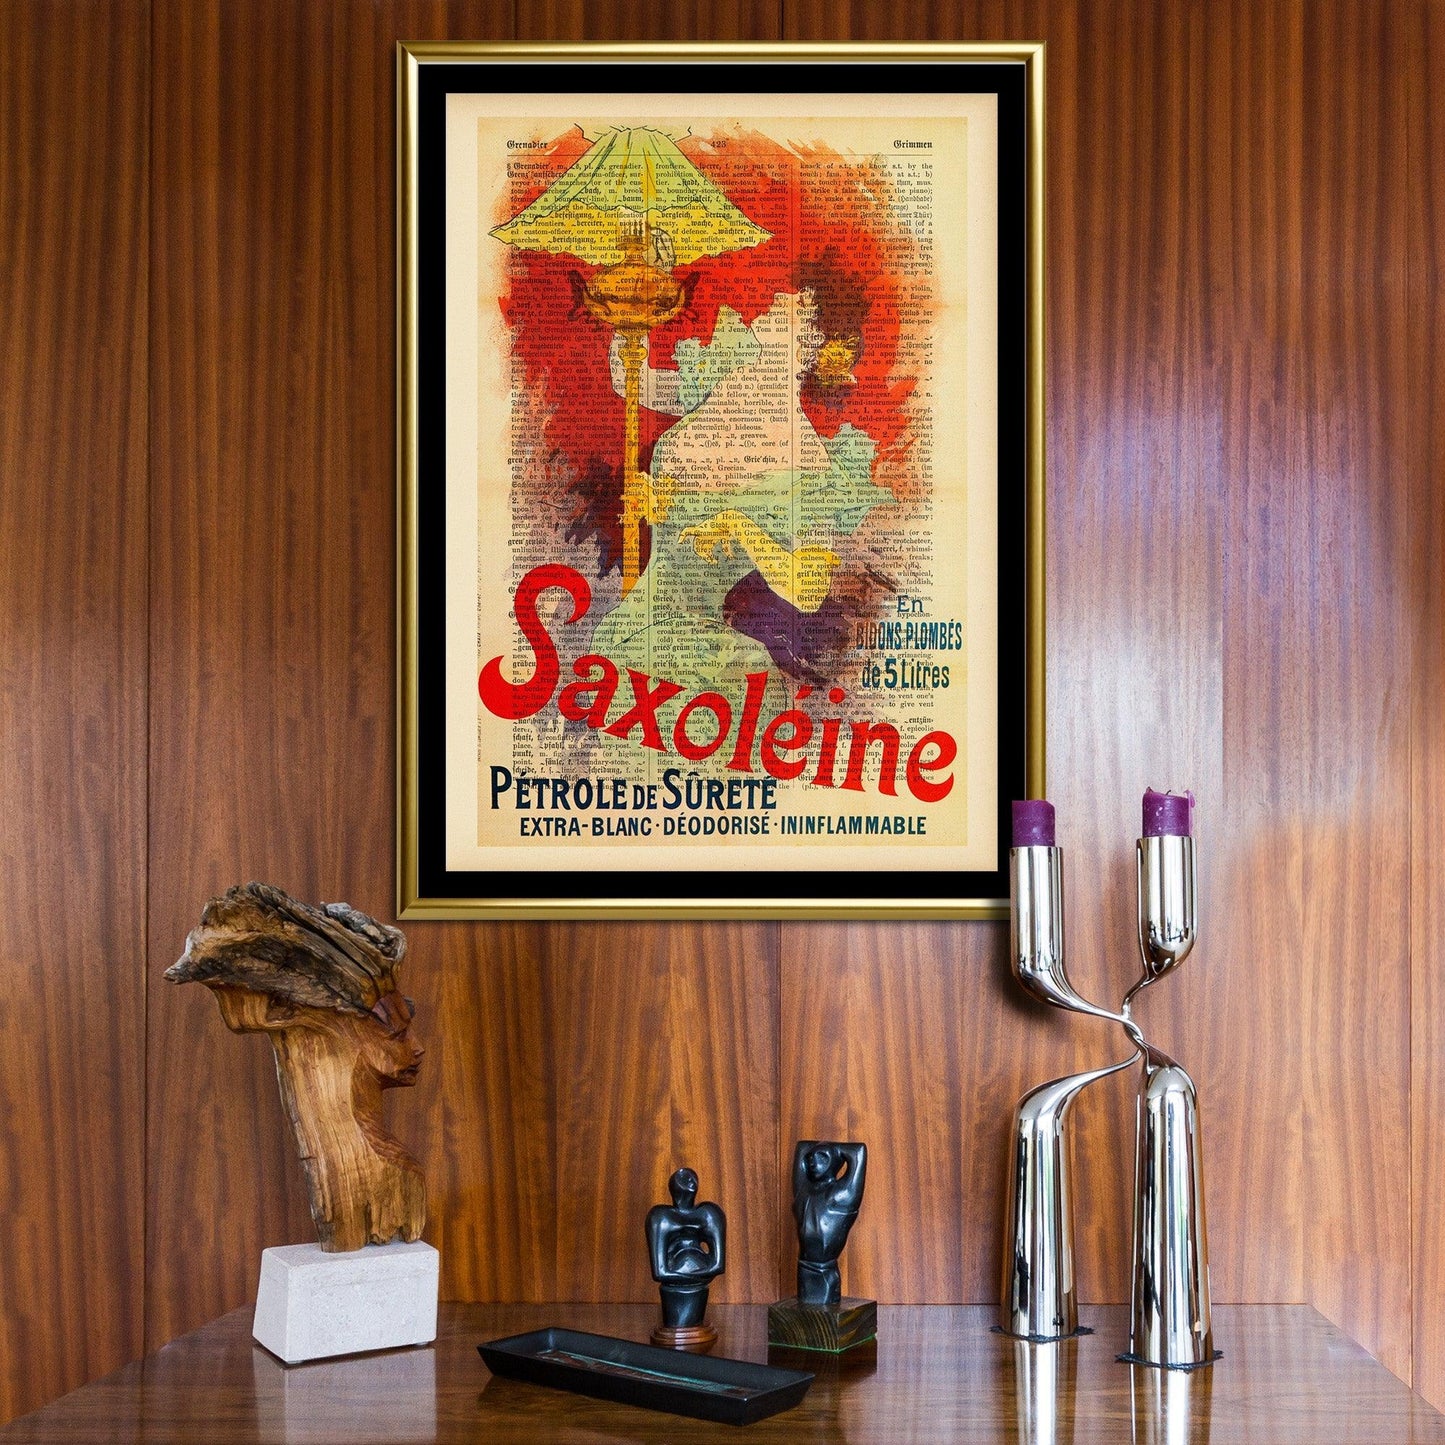 Give your home decor a touch of elegance through our exquisite Saxoléine Pétrole de sureté reproduction poster. The artwork is a collage with the advertising poster for a safety lamp fuel design by Jules Chéret (French graphic designer, 1836-1932). Year of created 1892.